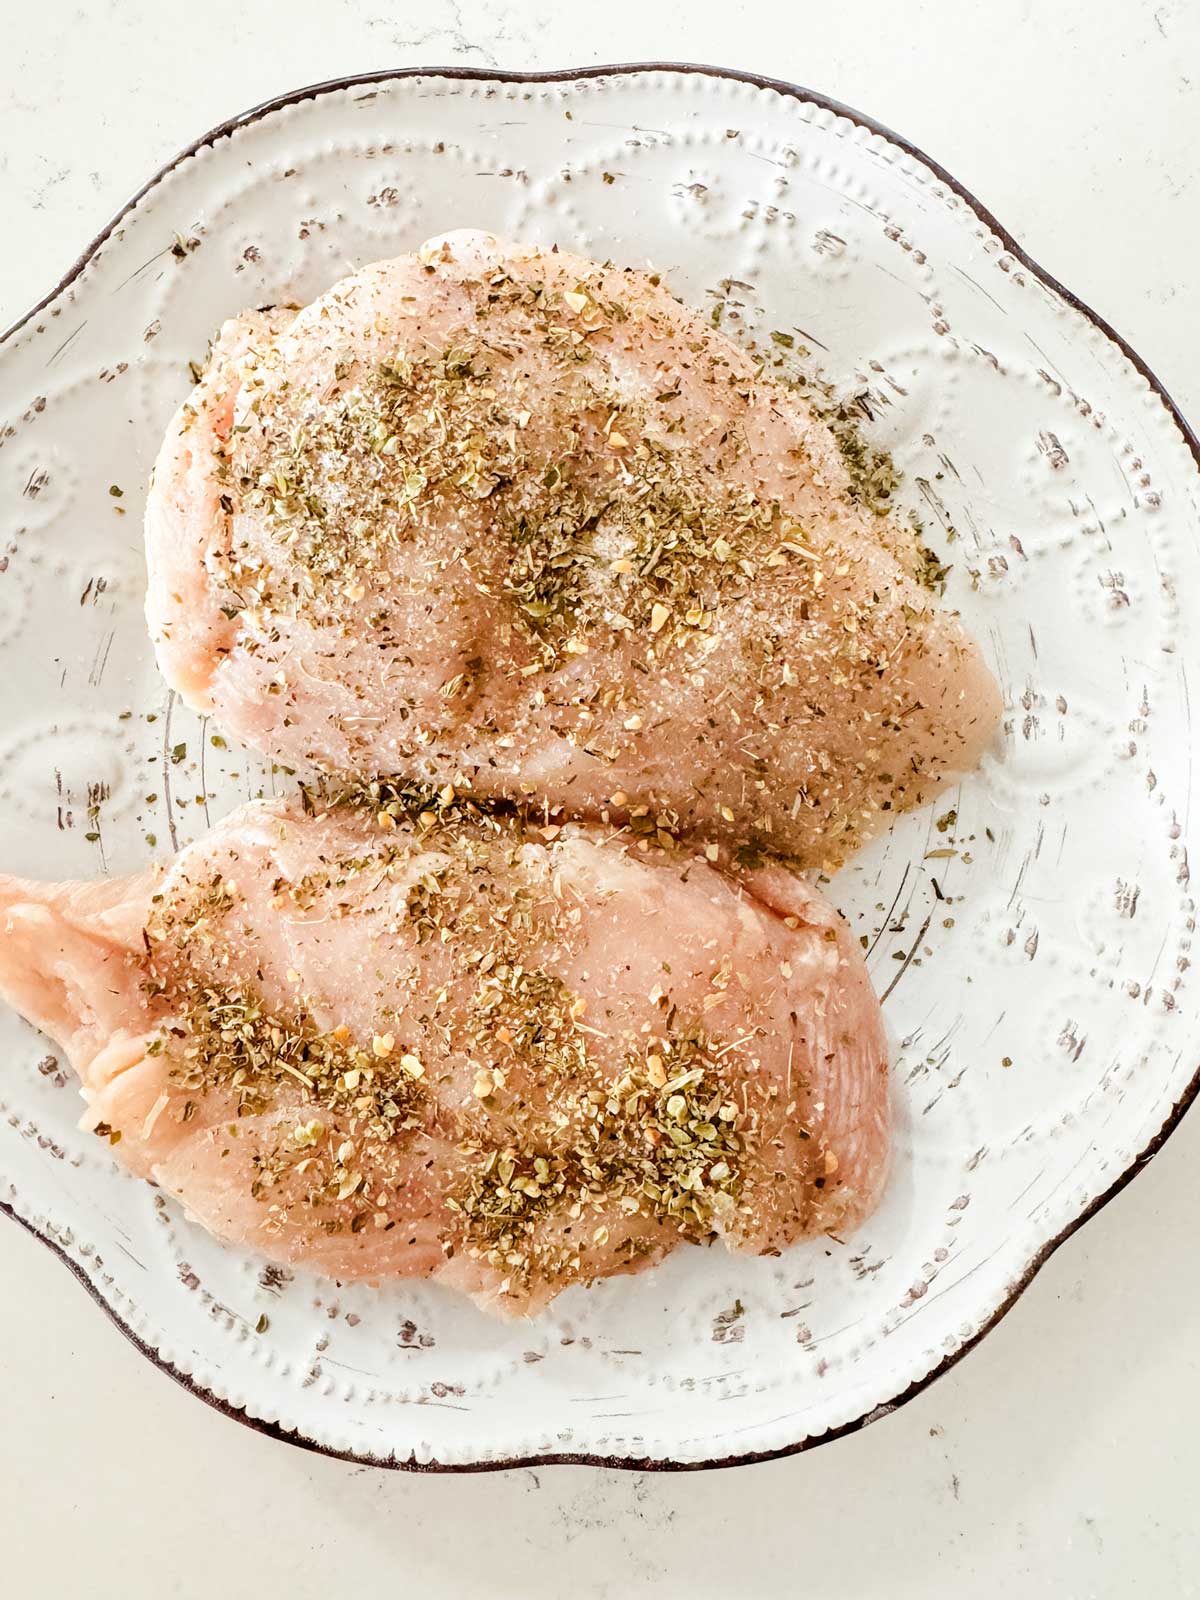 Raw seasoned chicken on a small plate.